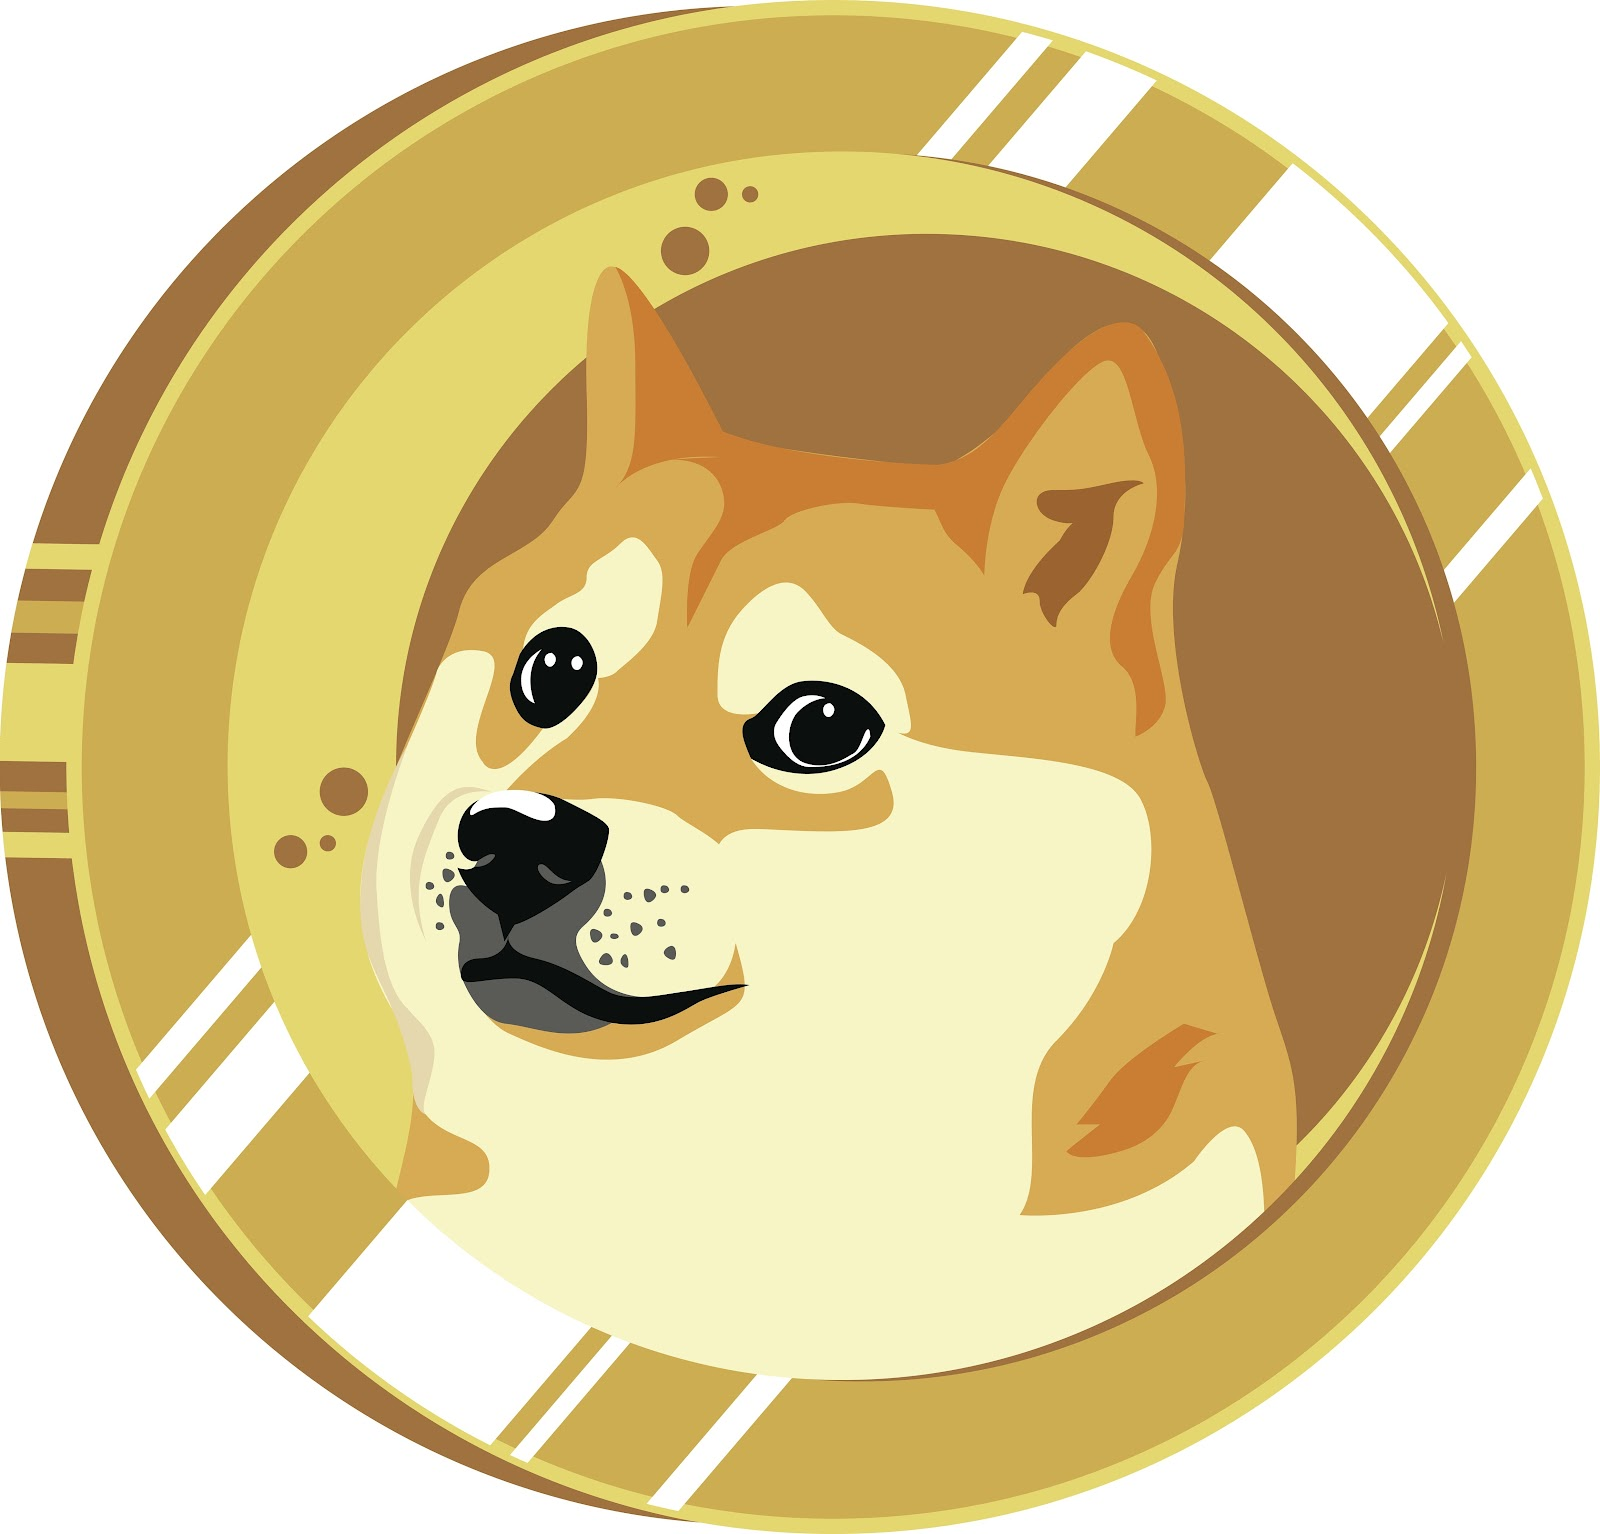 New Pepe Rival to Eclipse Dogecoin’s All Time Growth of 13,800%